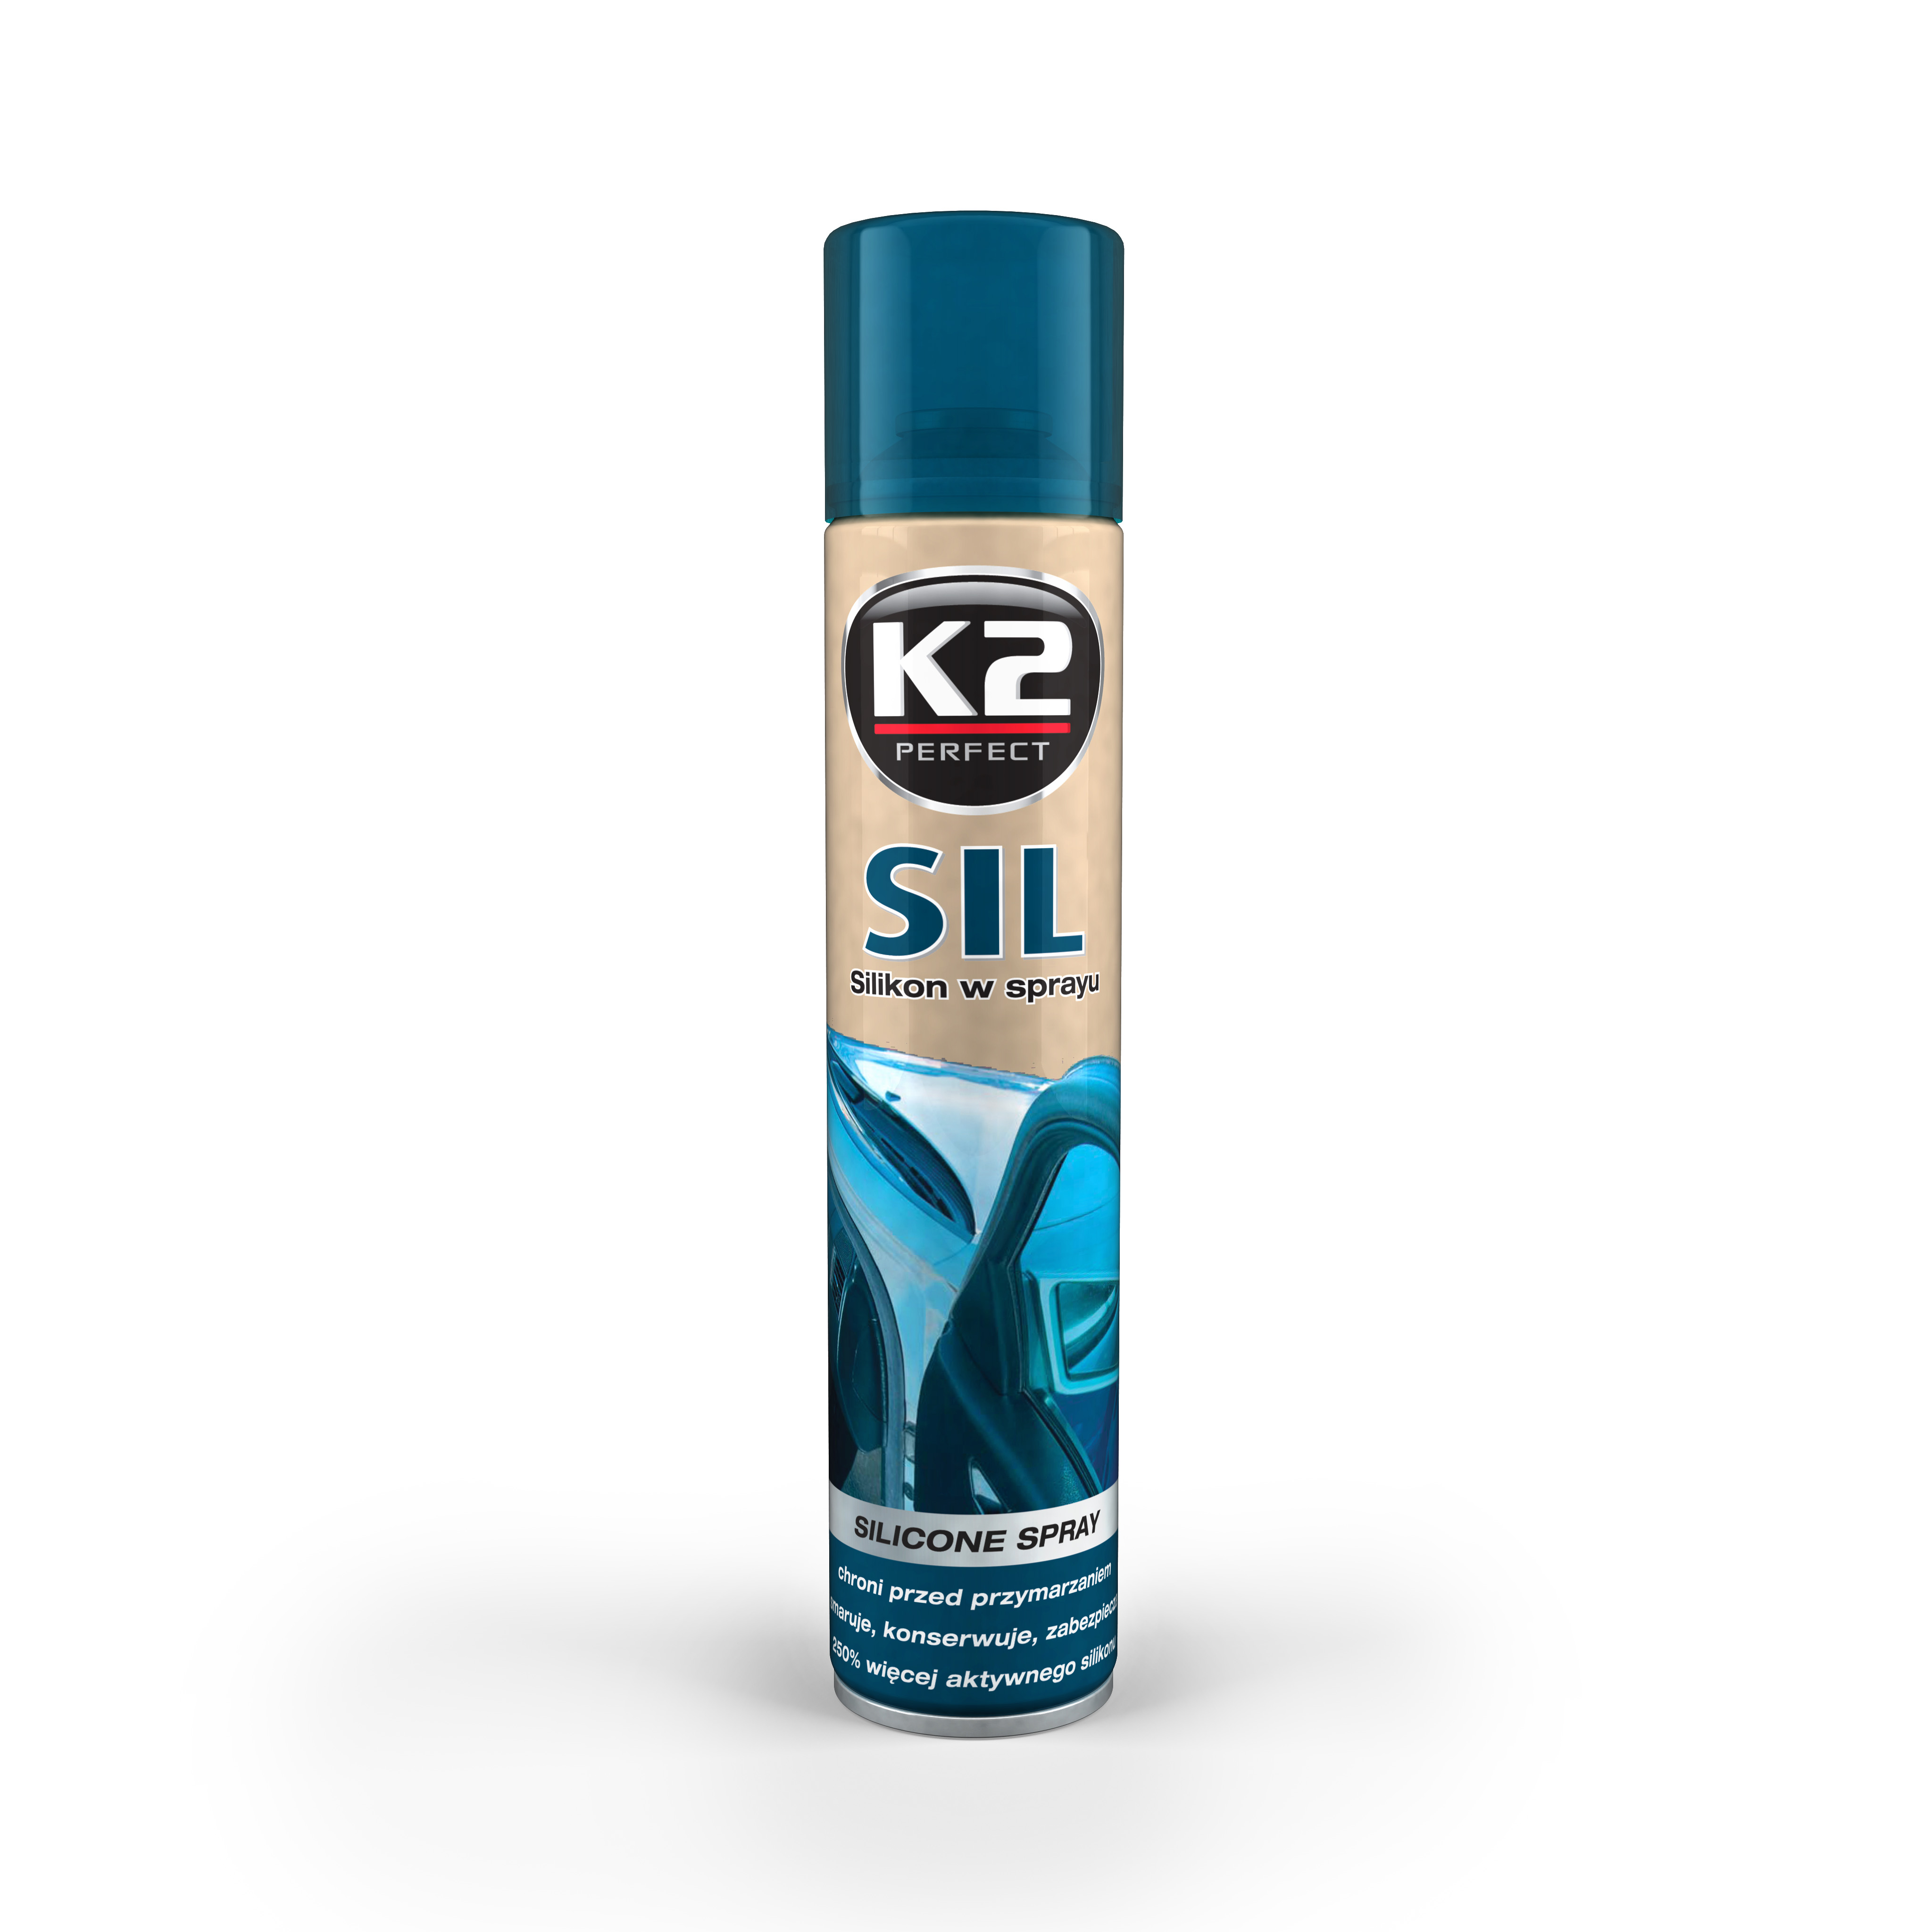 Lubricants, greases, silicones and other substances Silicone spray SIL 300 ML  Art. K2K633